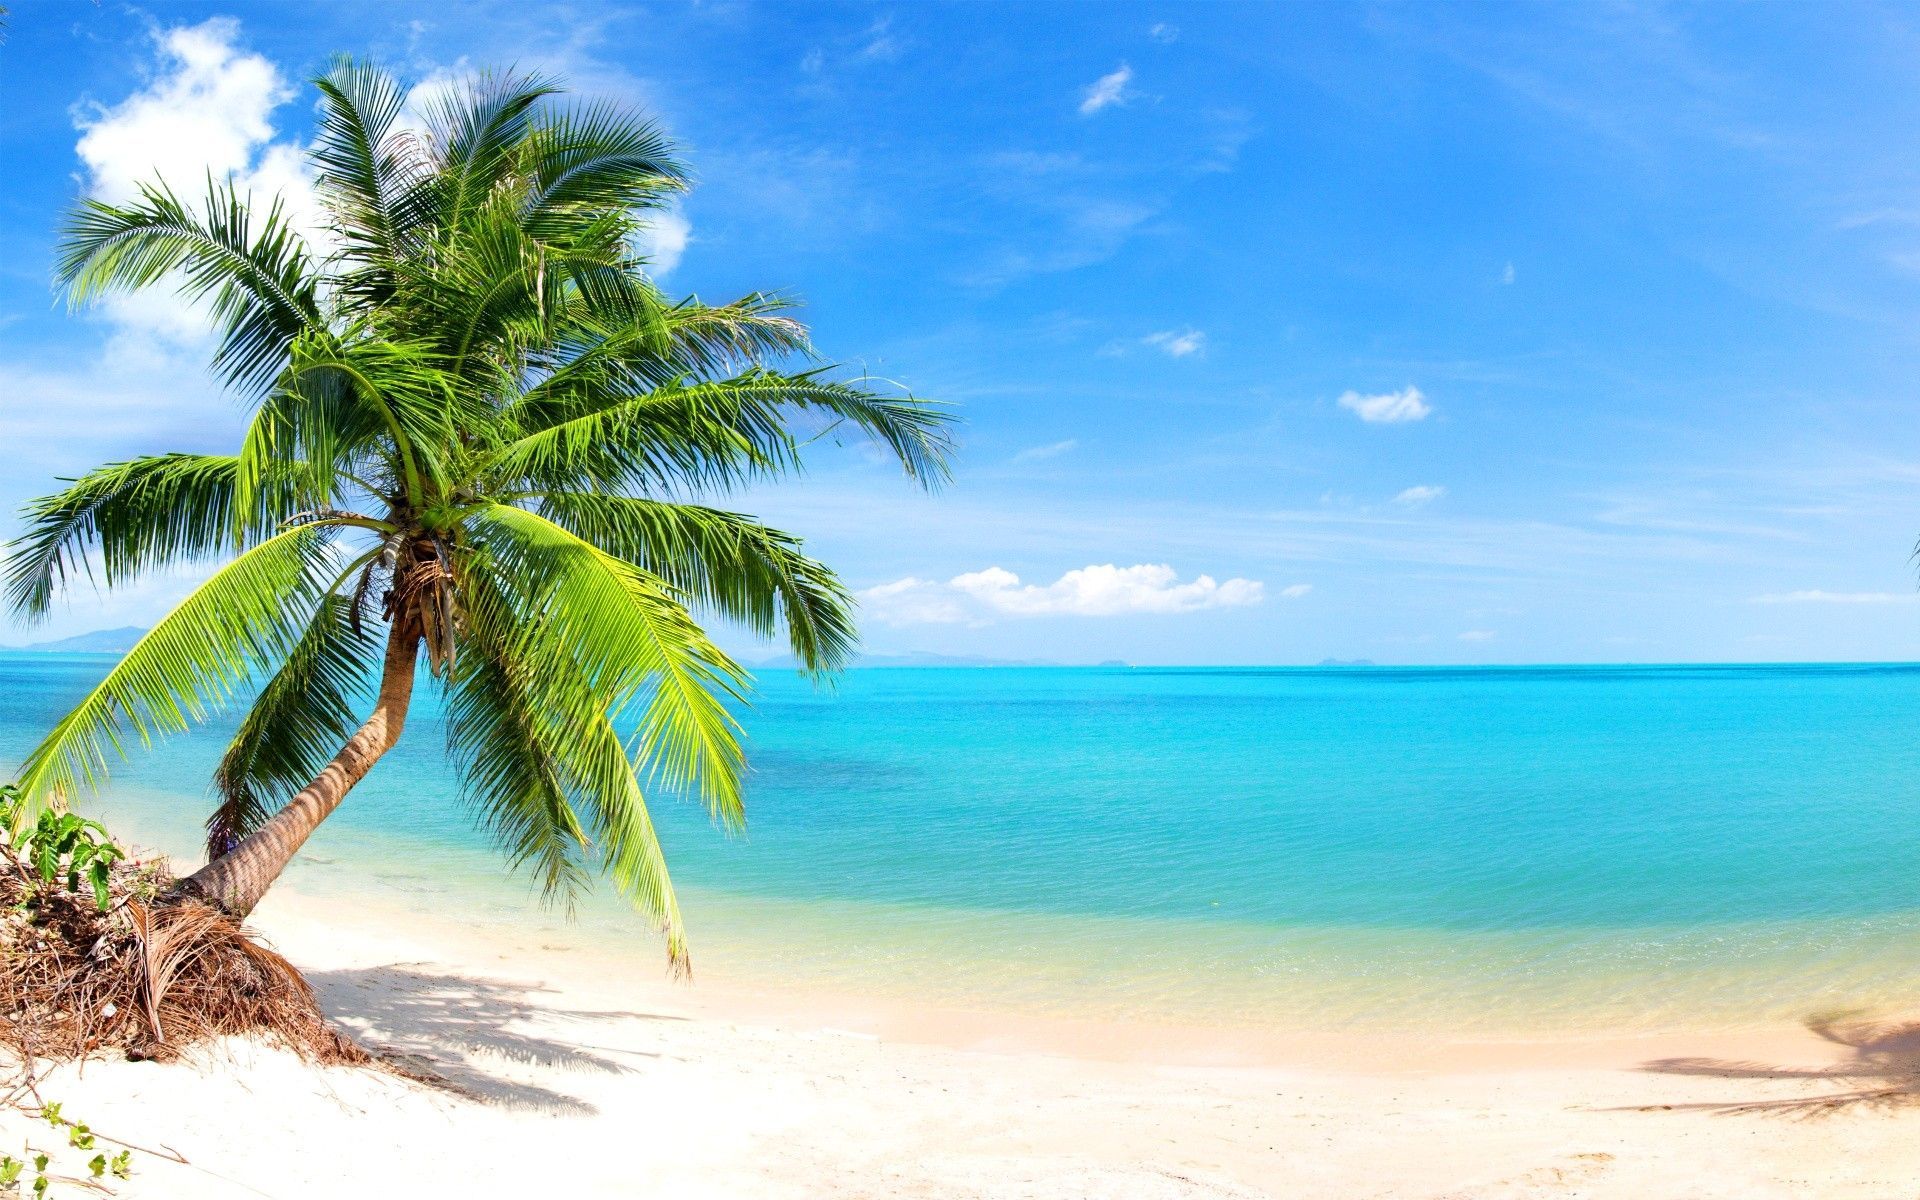 Download Tropical Beaches With Palm Trees S Wallpaper Mobile Is Cool Wallpaper. Palm trees wallpaper, Beach wallpaper, Beach phone wallpaper